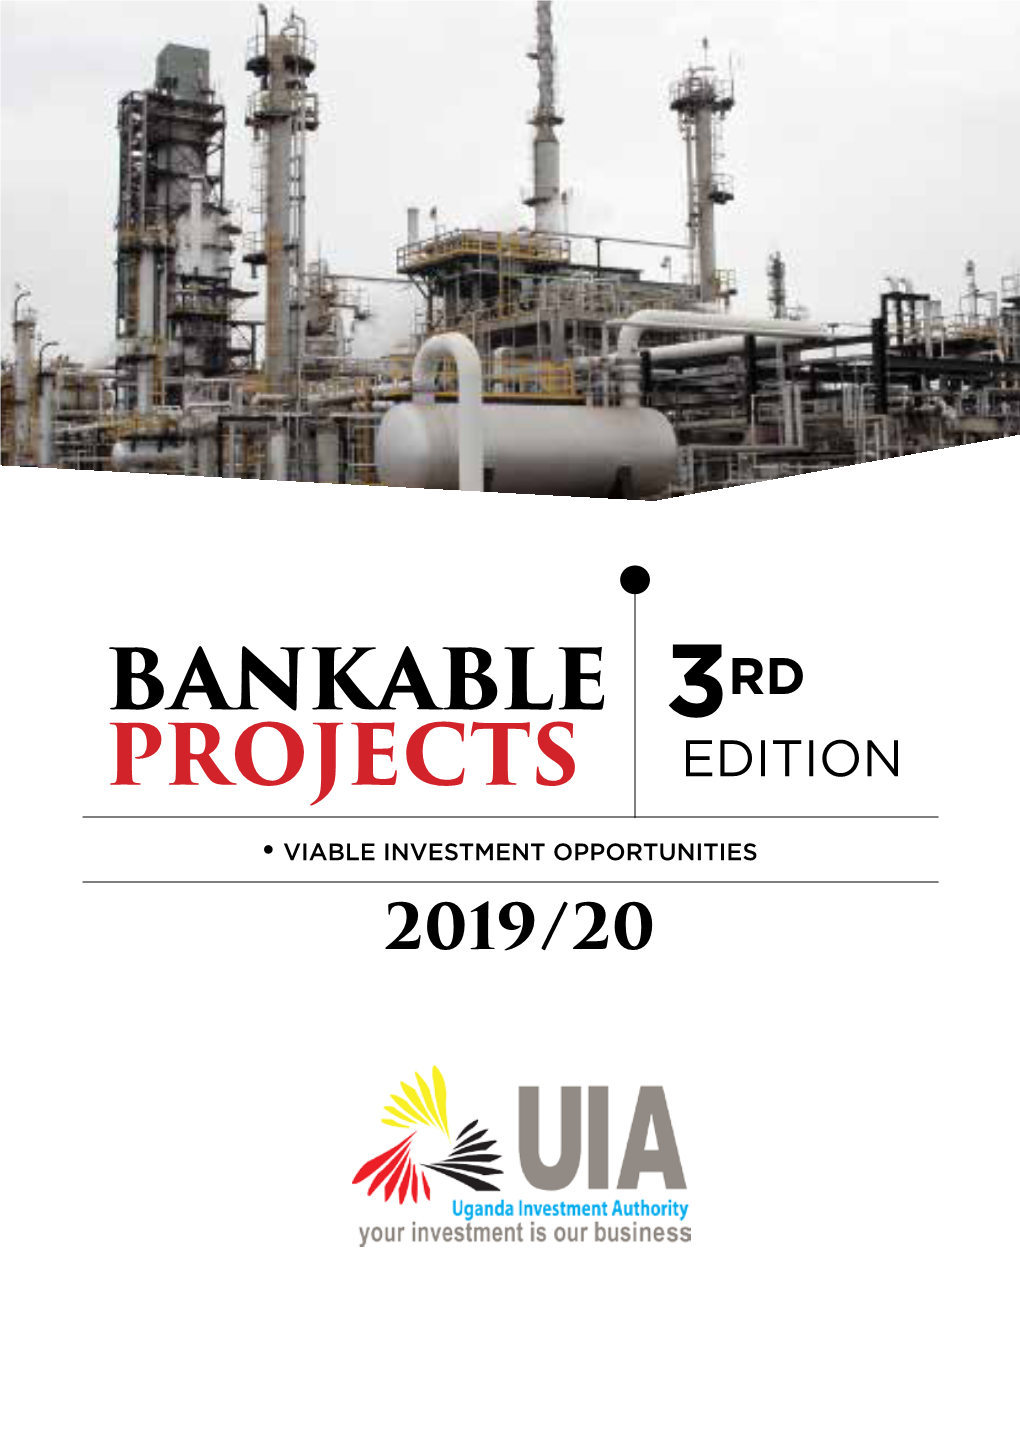 BANKABLE-PROJECTS-2.Pdf